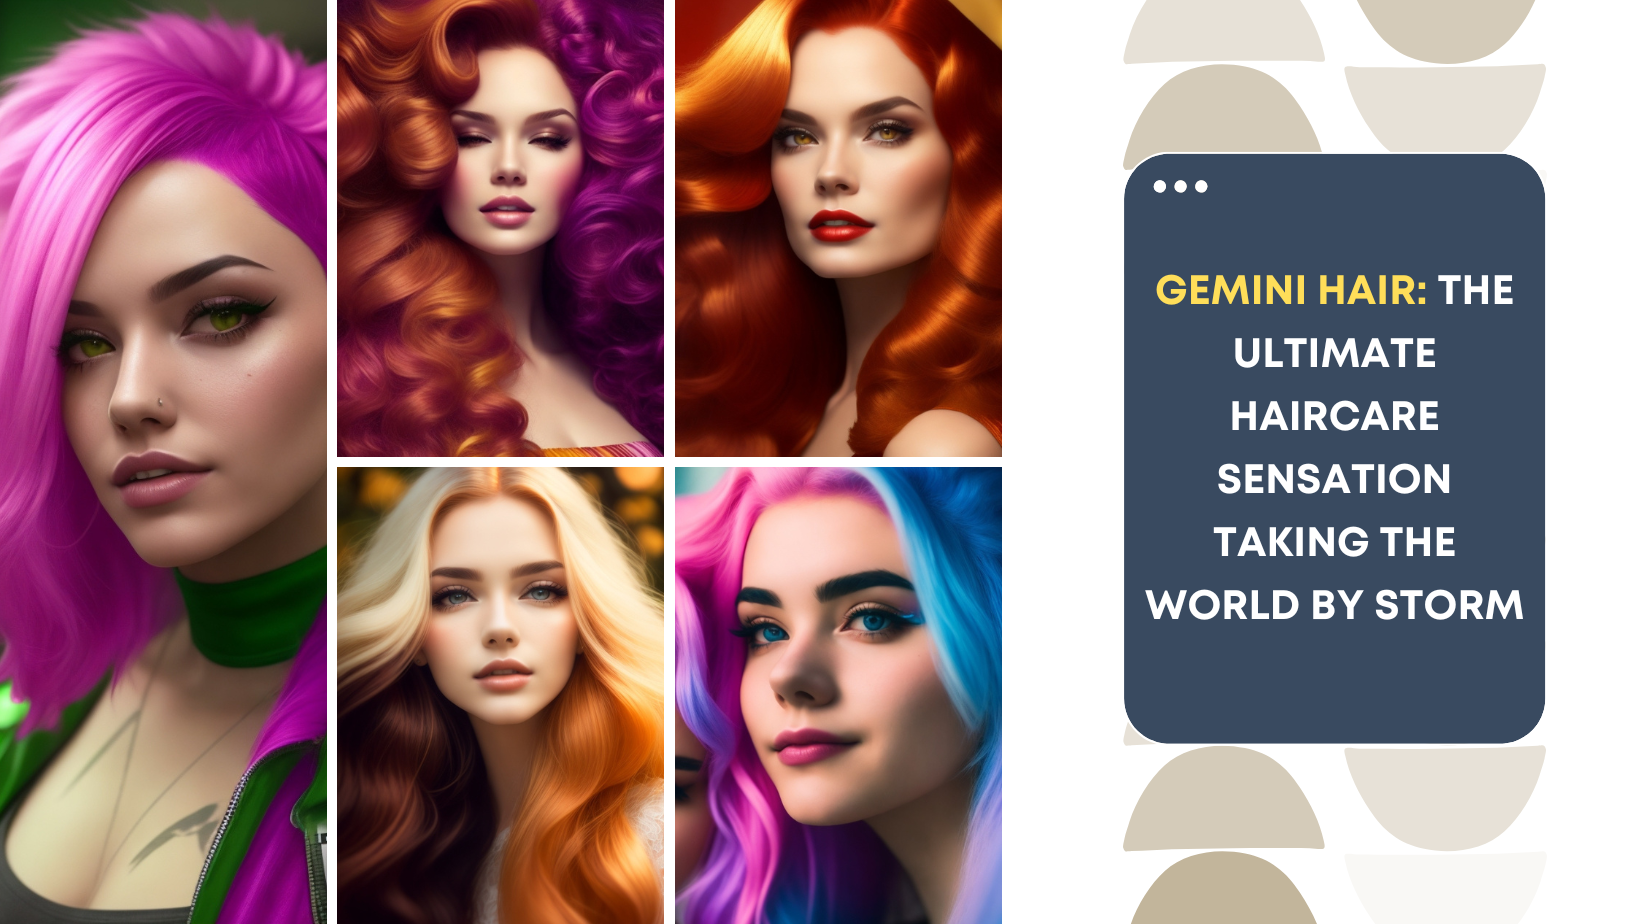 Gemini Hair : The Ultimate Haircare Sensation Taking the World by Storm